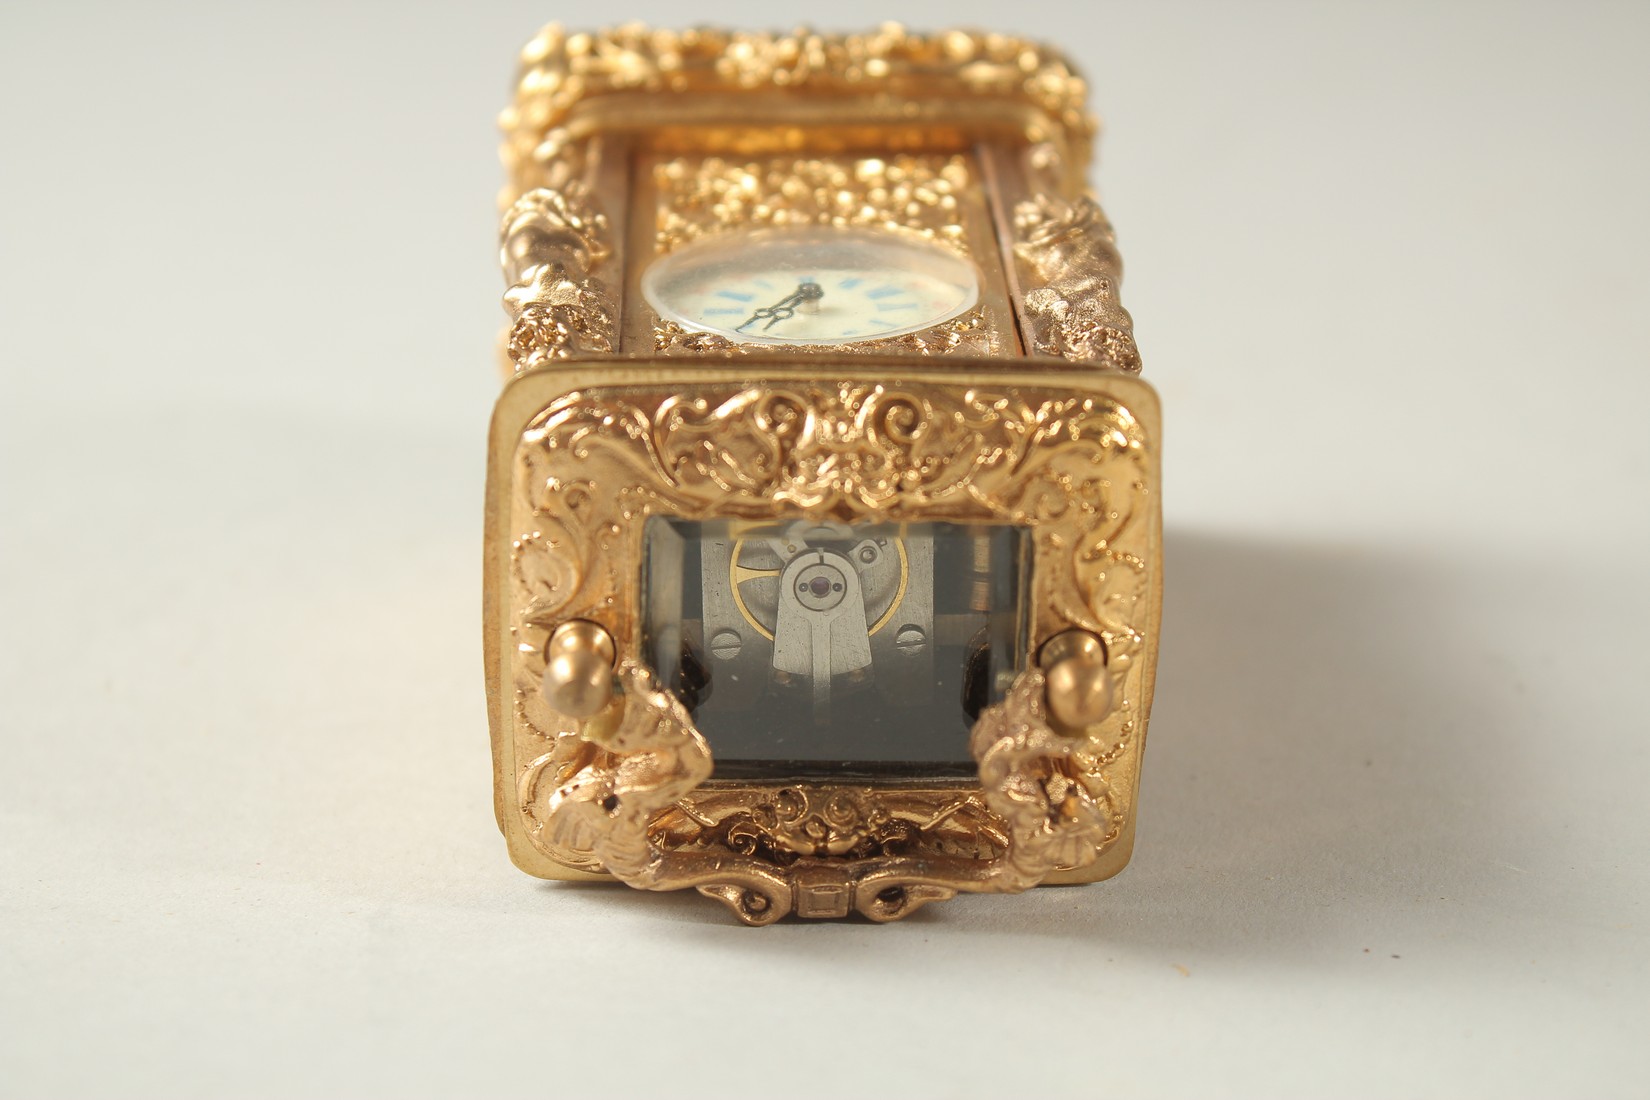 A CAST GILT MINIATURE CARRIAGE CLOCK with female figures. - Image 5 of 5